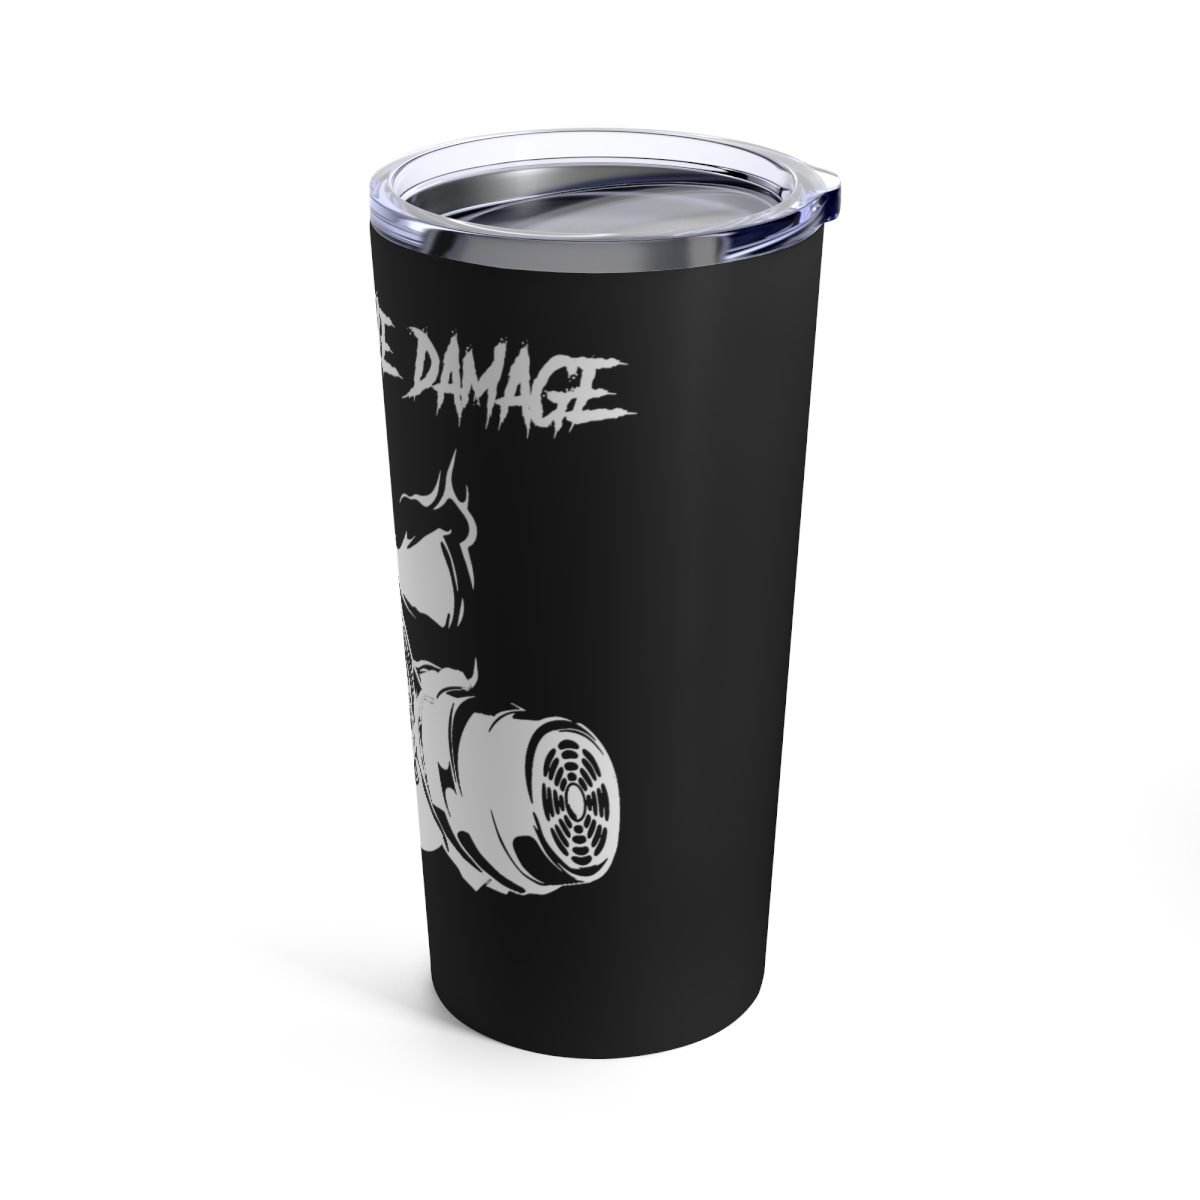 Never Mind The Damage 20oz Stainless Steel Tumbler